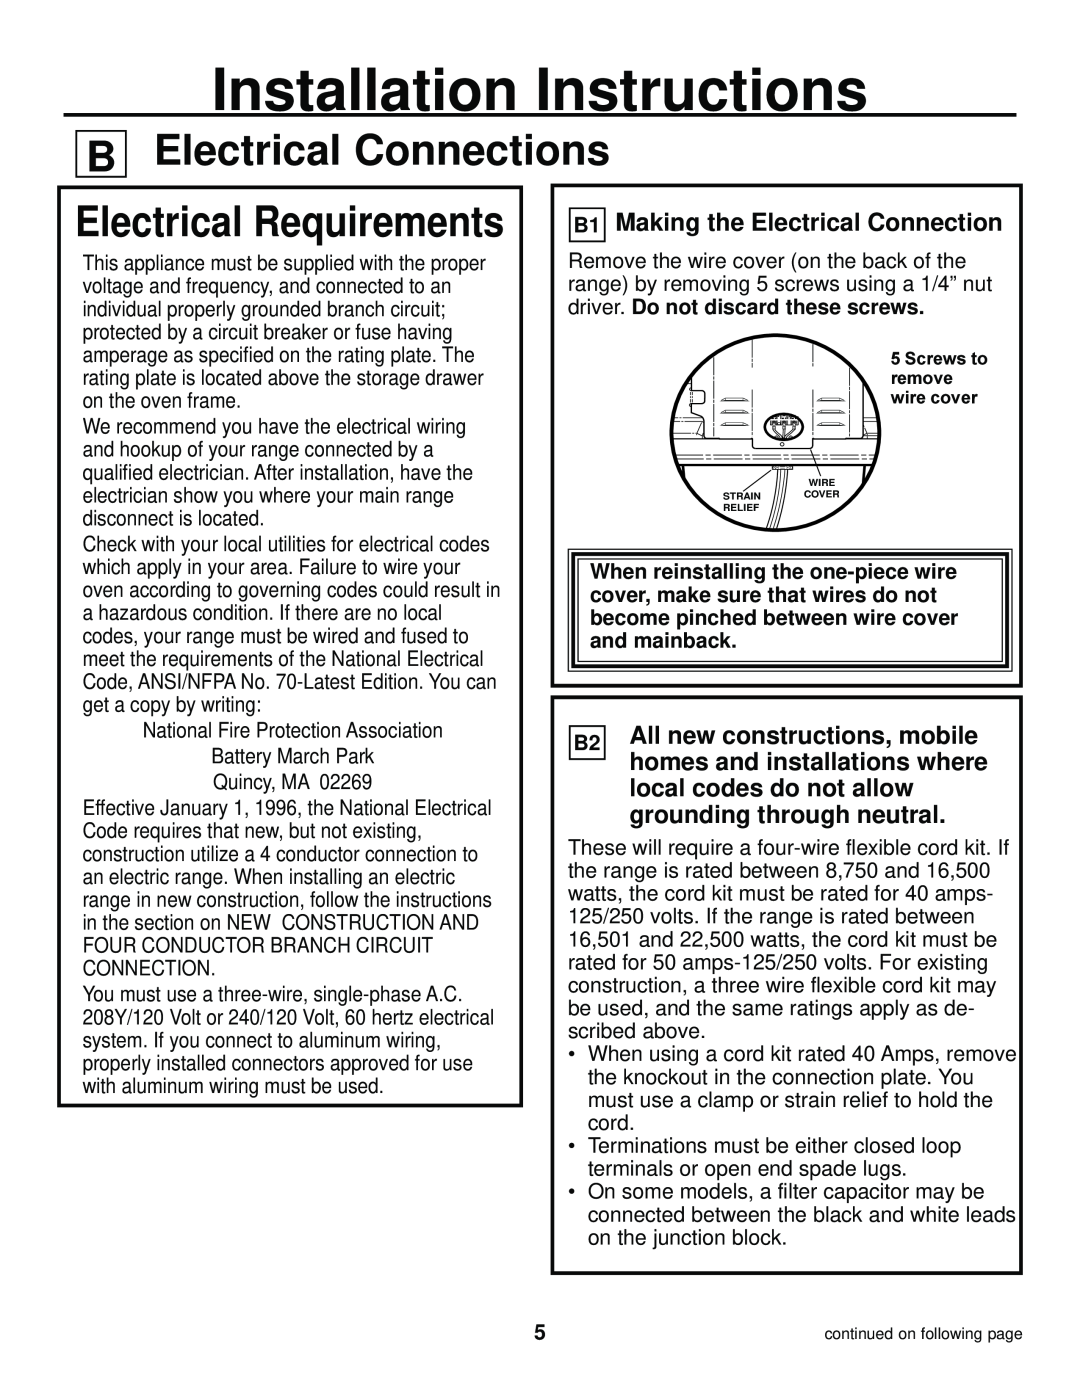 GE 31-10463, 229C4053P447-3 1 Electrical Connections, Electrical Requirements, B1 Making the Electrical Connection 